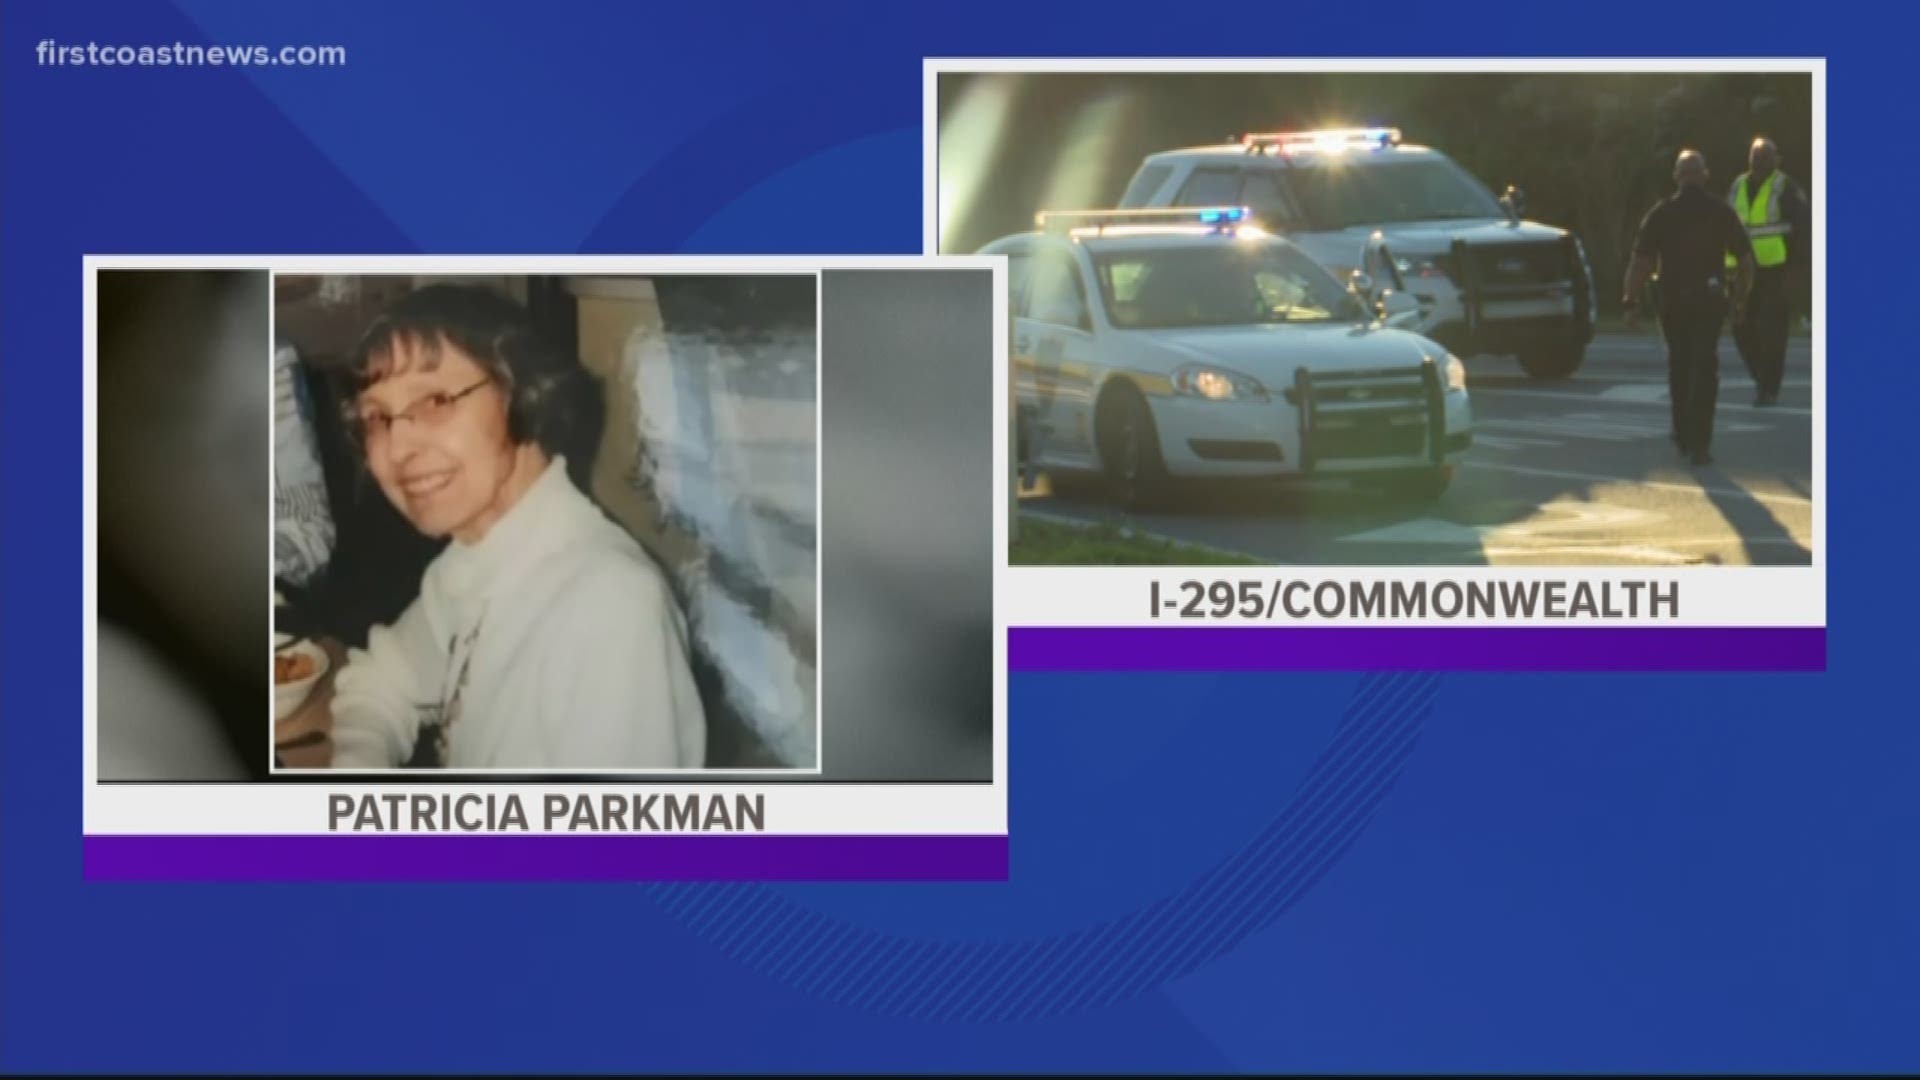 The Jacksonville Sheriff's Office believes the remains of Patricia Parkman, a missing elderly woman, have been found near Interstate-295 on the Westside.